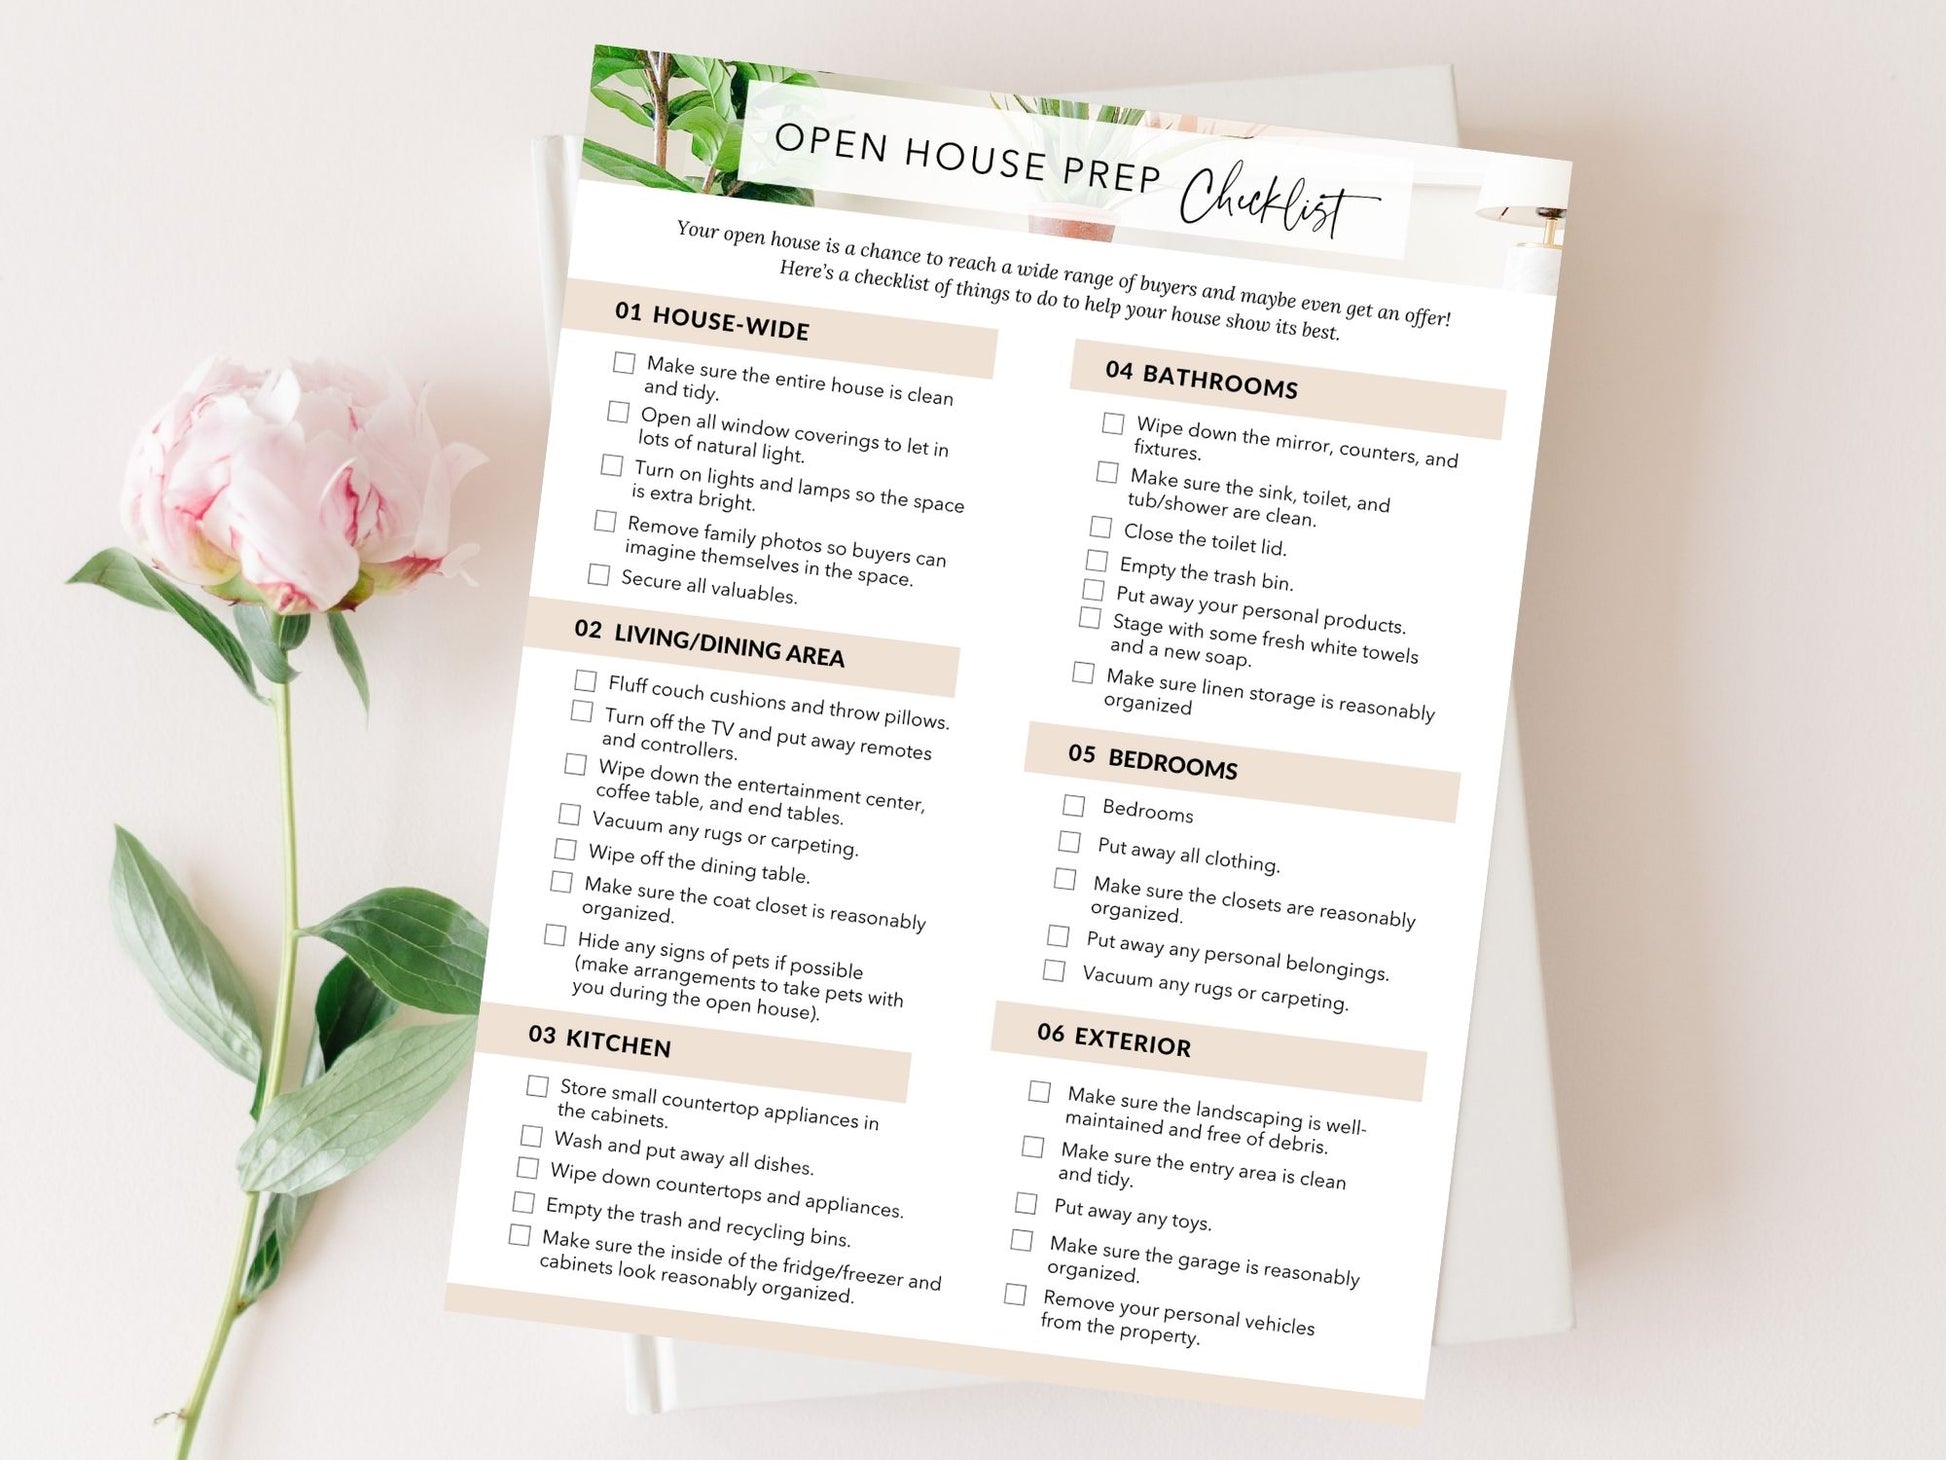 Real Estate Open House Prep Checklist - Comprehensive and easy-to-follow checklist for successful open houses, covering property staging, marketing materials, and creating a memorable and inviting atmosphere.